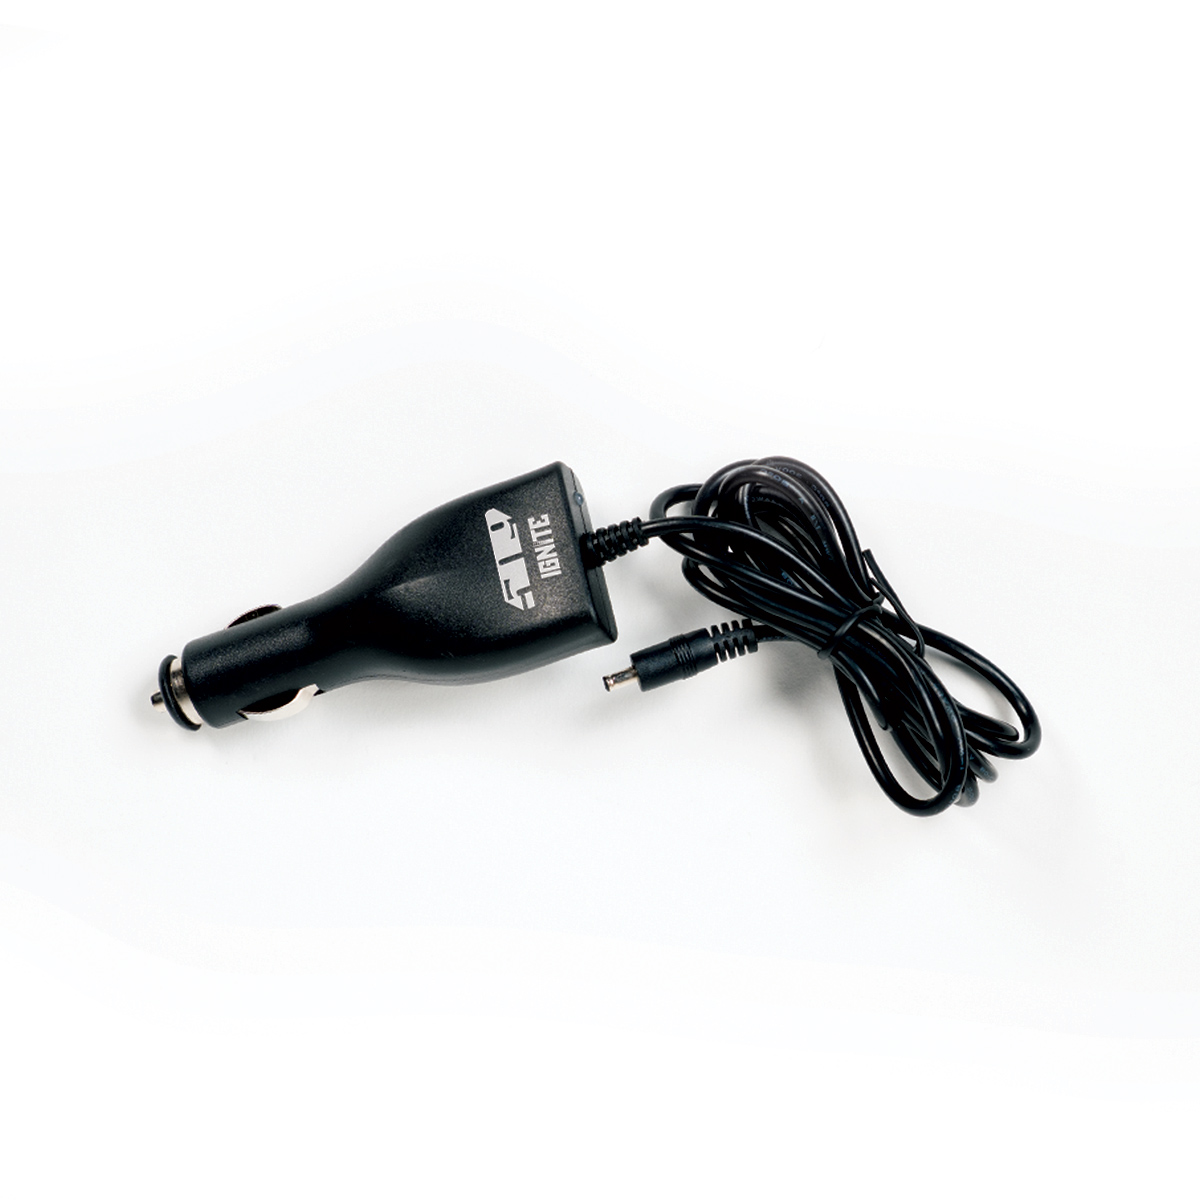 509 accessories 12 volt charger for ignite batteries